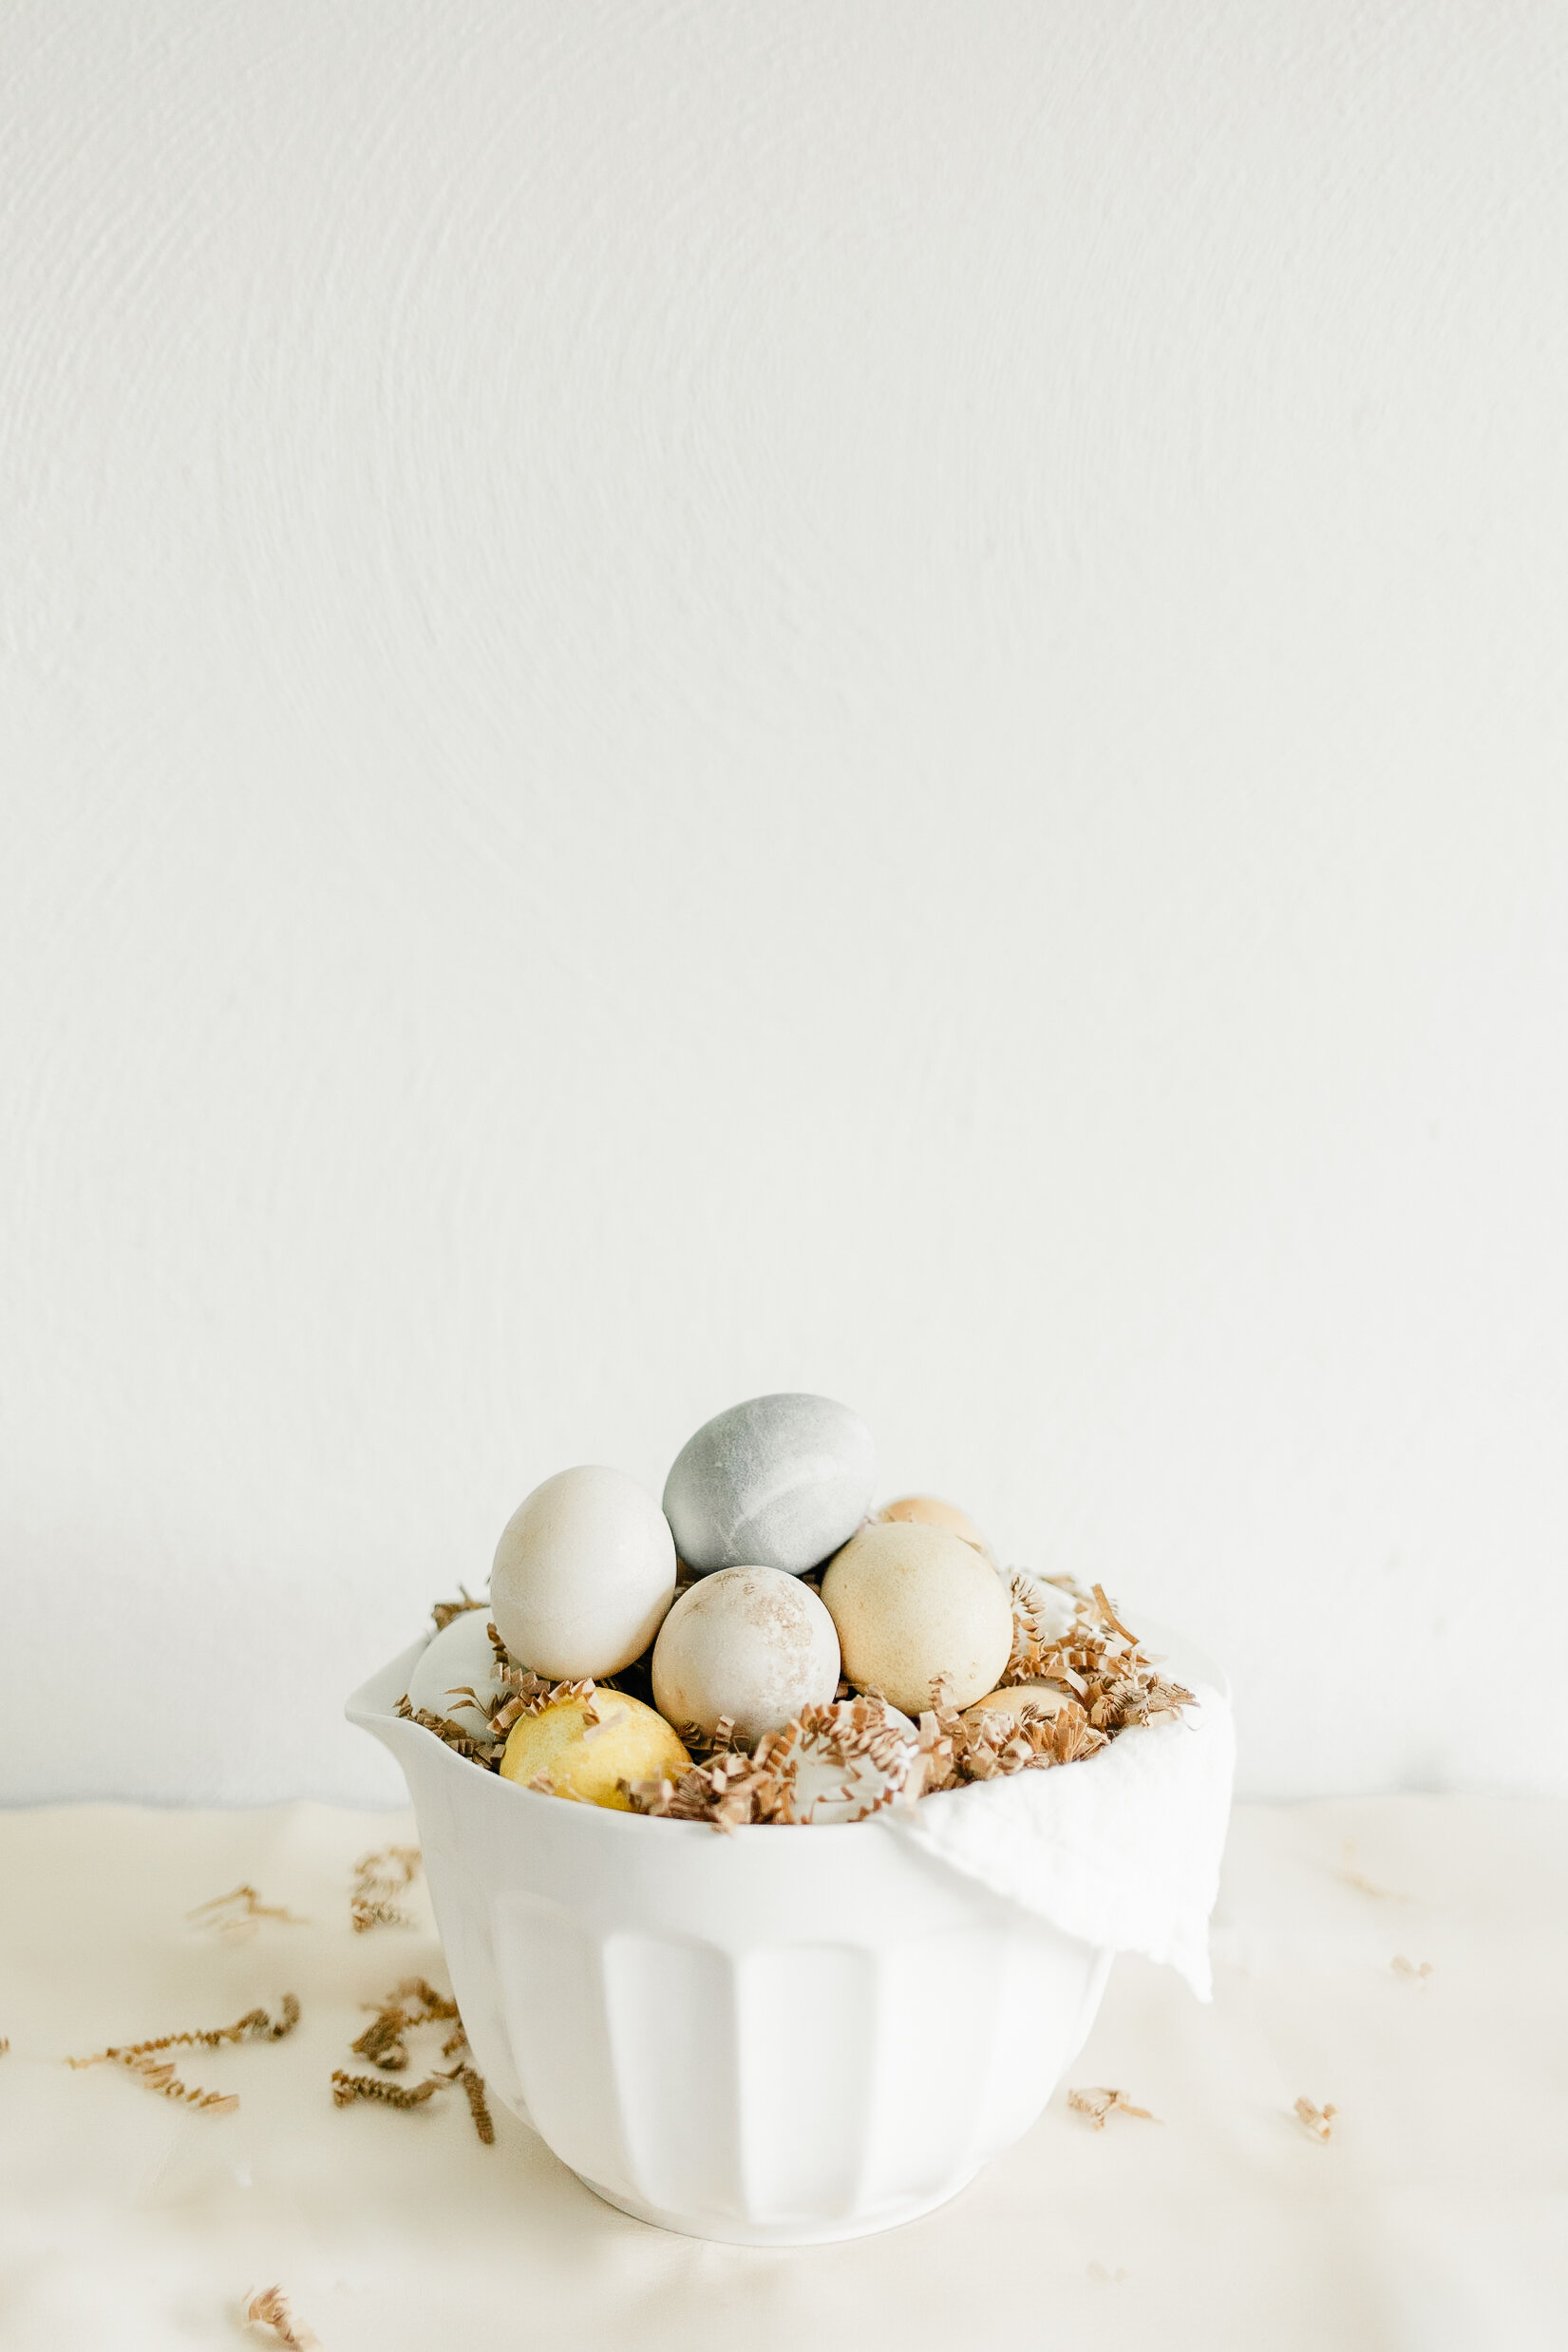 How to Dye Gorgeous Easter Eggs Naturally with Items From Your Kitchen Pantry | Catherine Milliron Photography | Ohio Wedding + Engagement Photographer